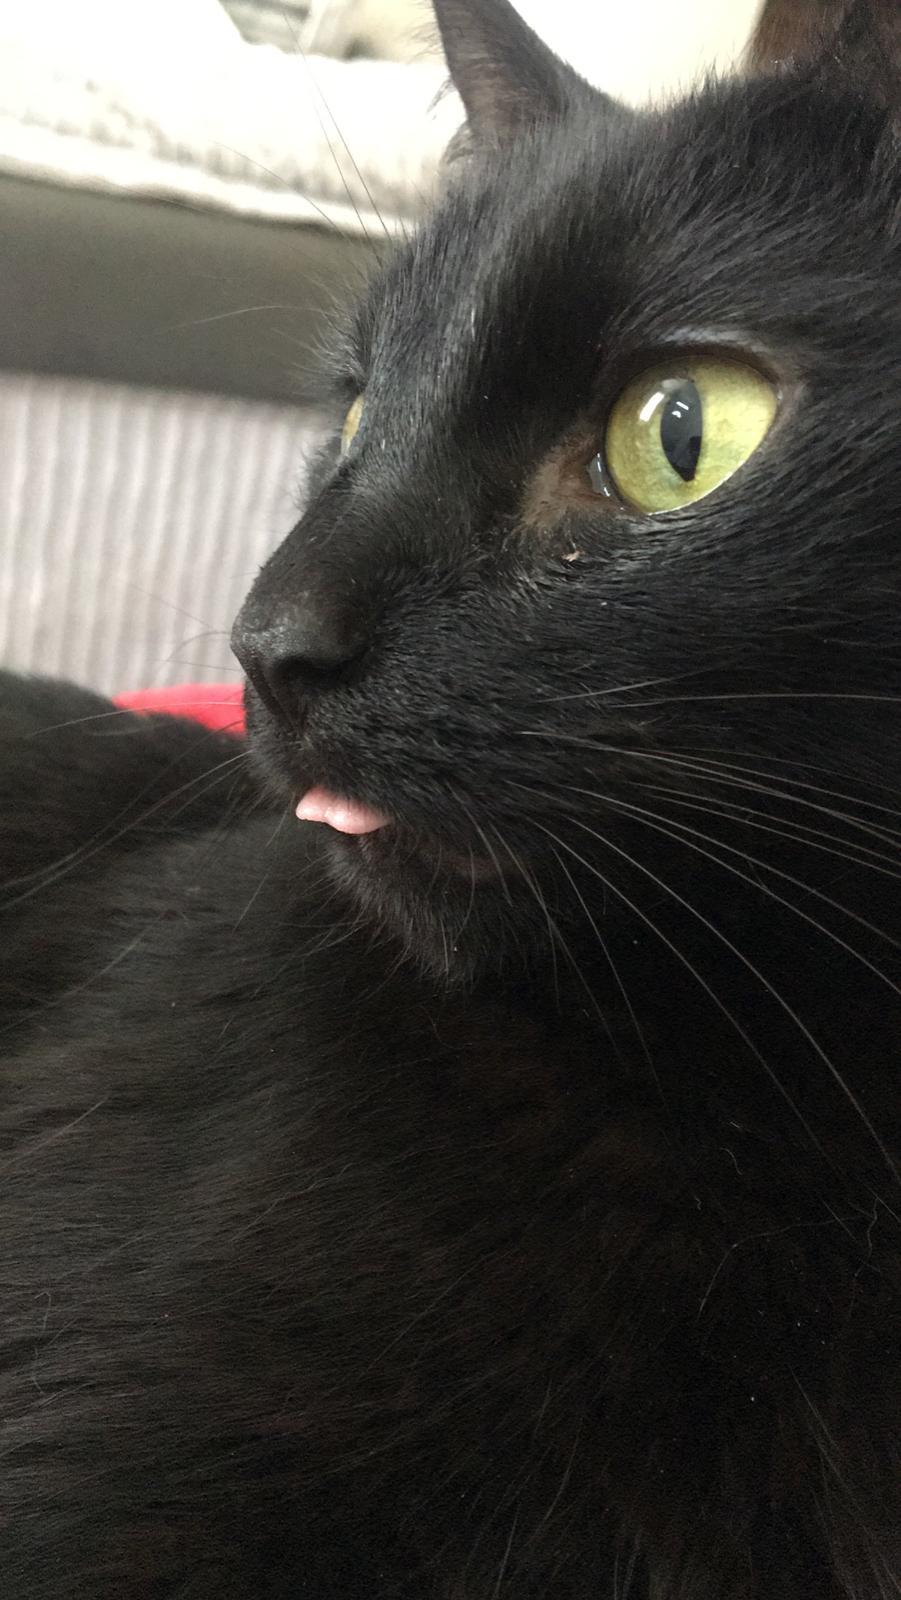 A black cat sticking its tongue out. Autistic cat